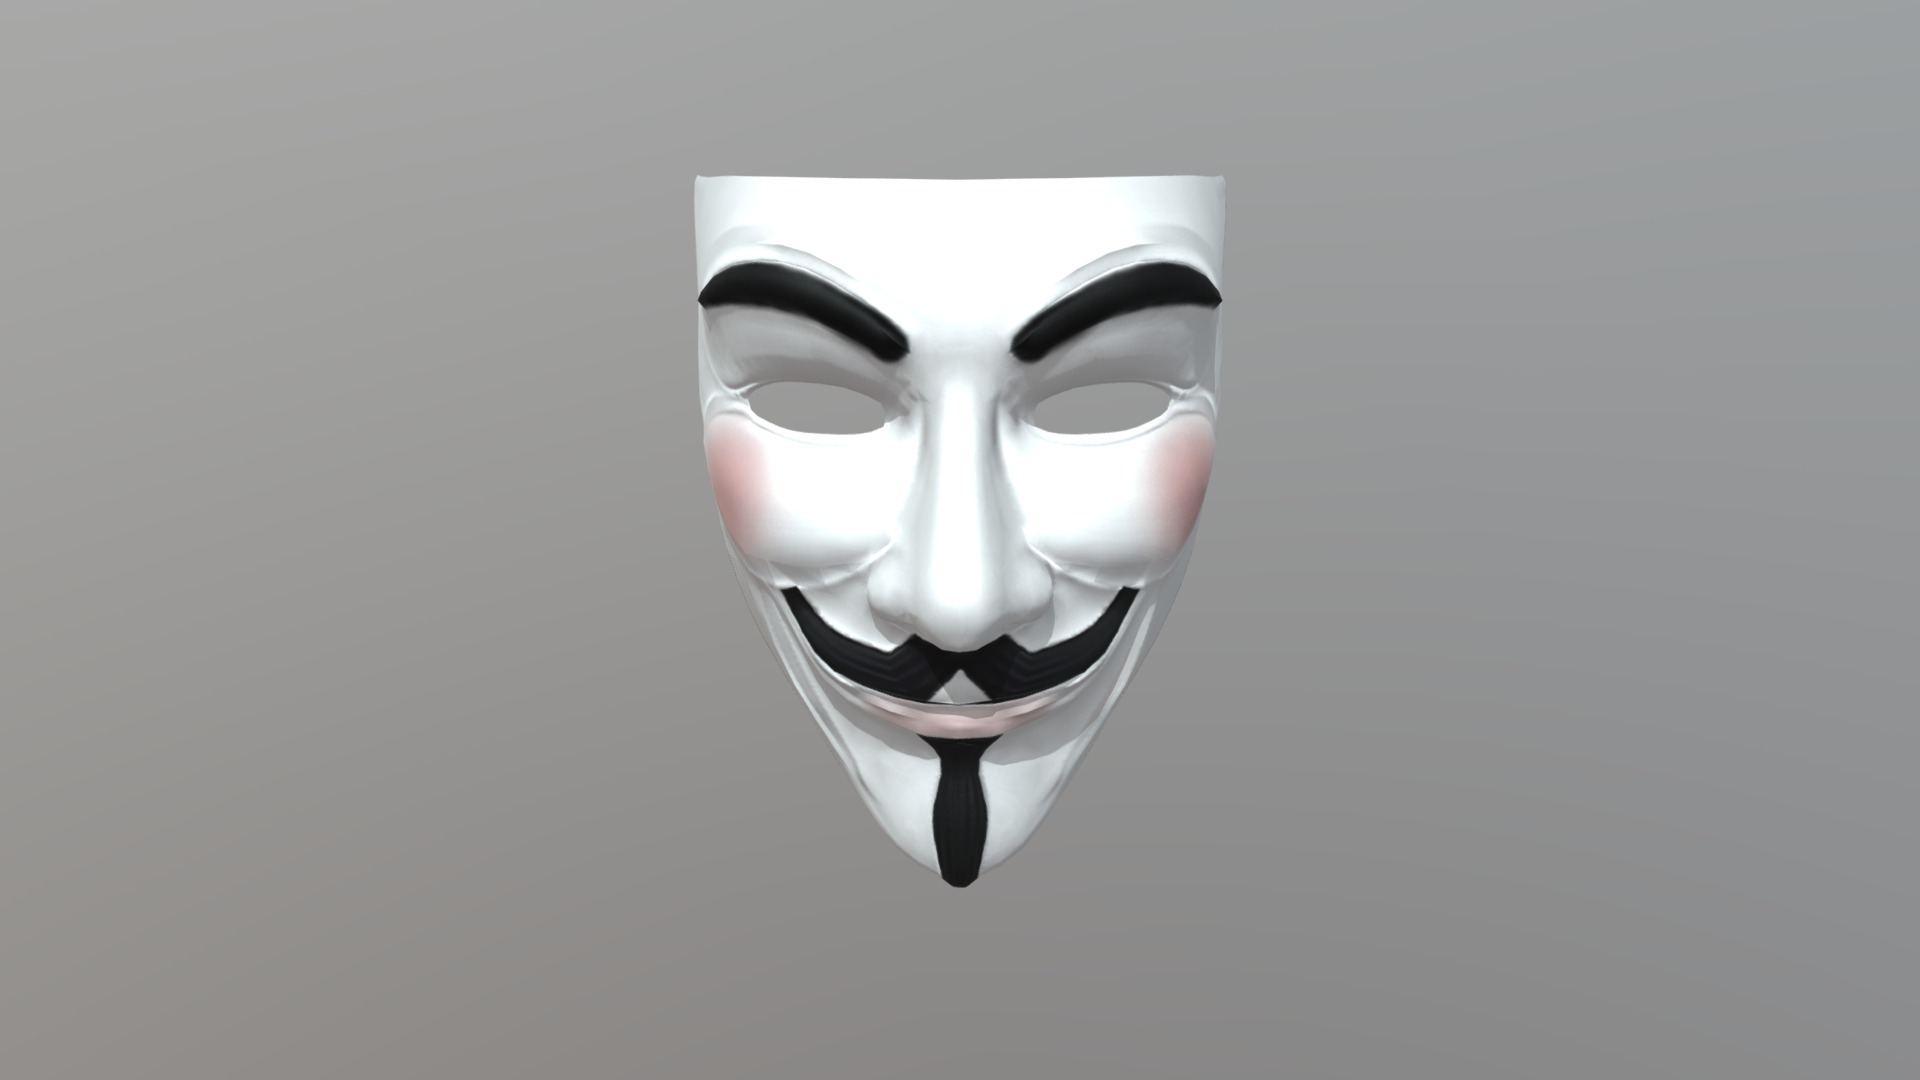 3D model Vendetta Lowpoly - This is a 3D model of the Vendetta Lowpoly. The 3D model is about a white and black mask.